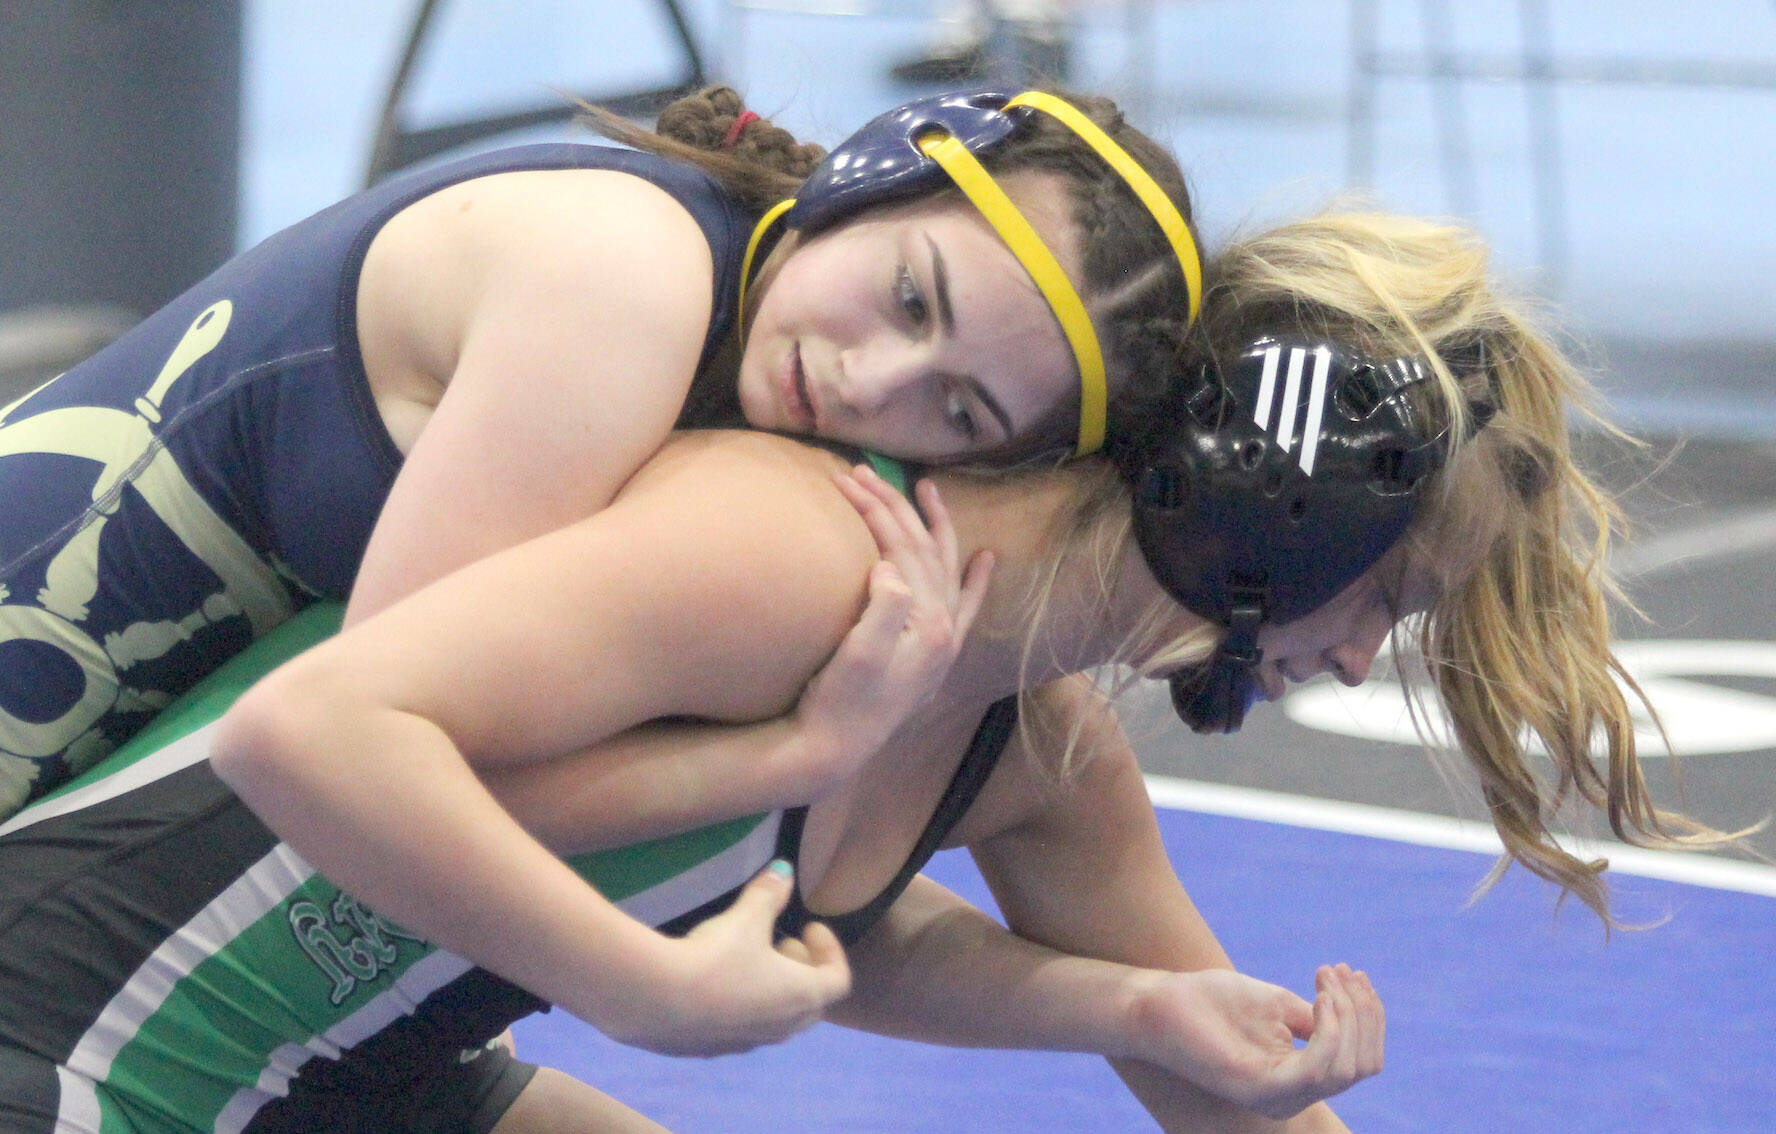 Homer’s Saoirse Cook battles Colony’s Bayleigh Harrington during the girls 126-pound final at the Lancer Smith Memorial wrestling tournament Saturday, Nov. 19, in Wasilla. (Photo by Jeremiah Bartz/Frontiersman)